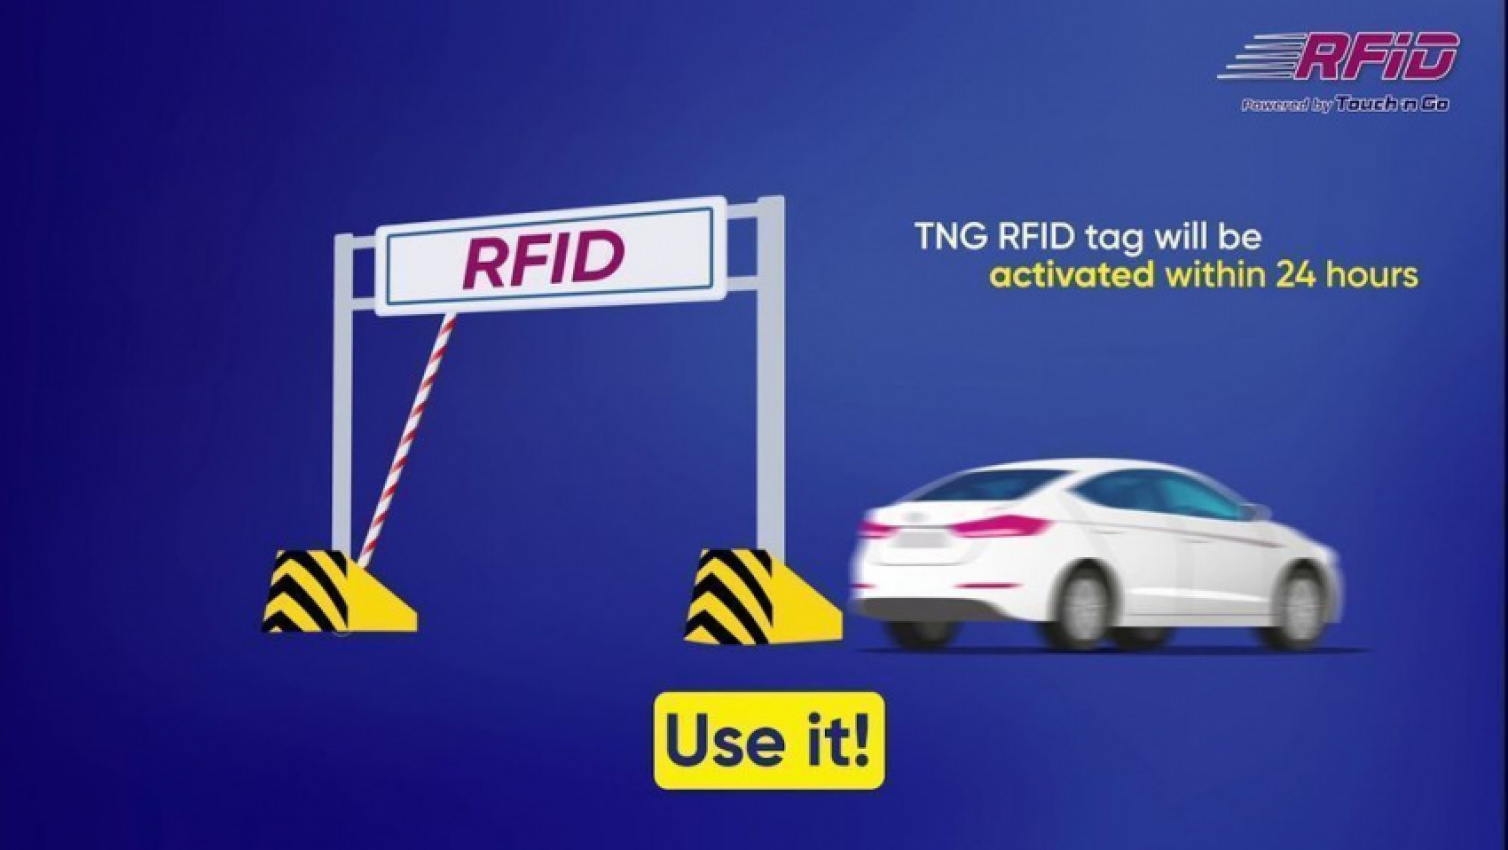 autos, cars, auto news, north-south expressway, plus, replacement rfid tag, rfid, rfid tag, touch &039;n go, faulty rfid tags to be replaced free of charge